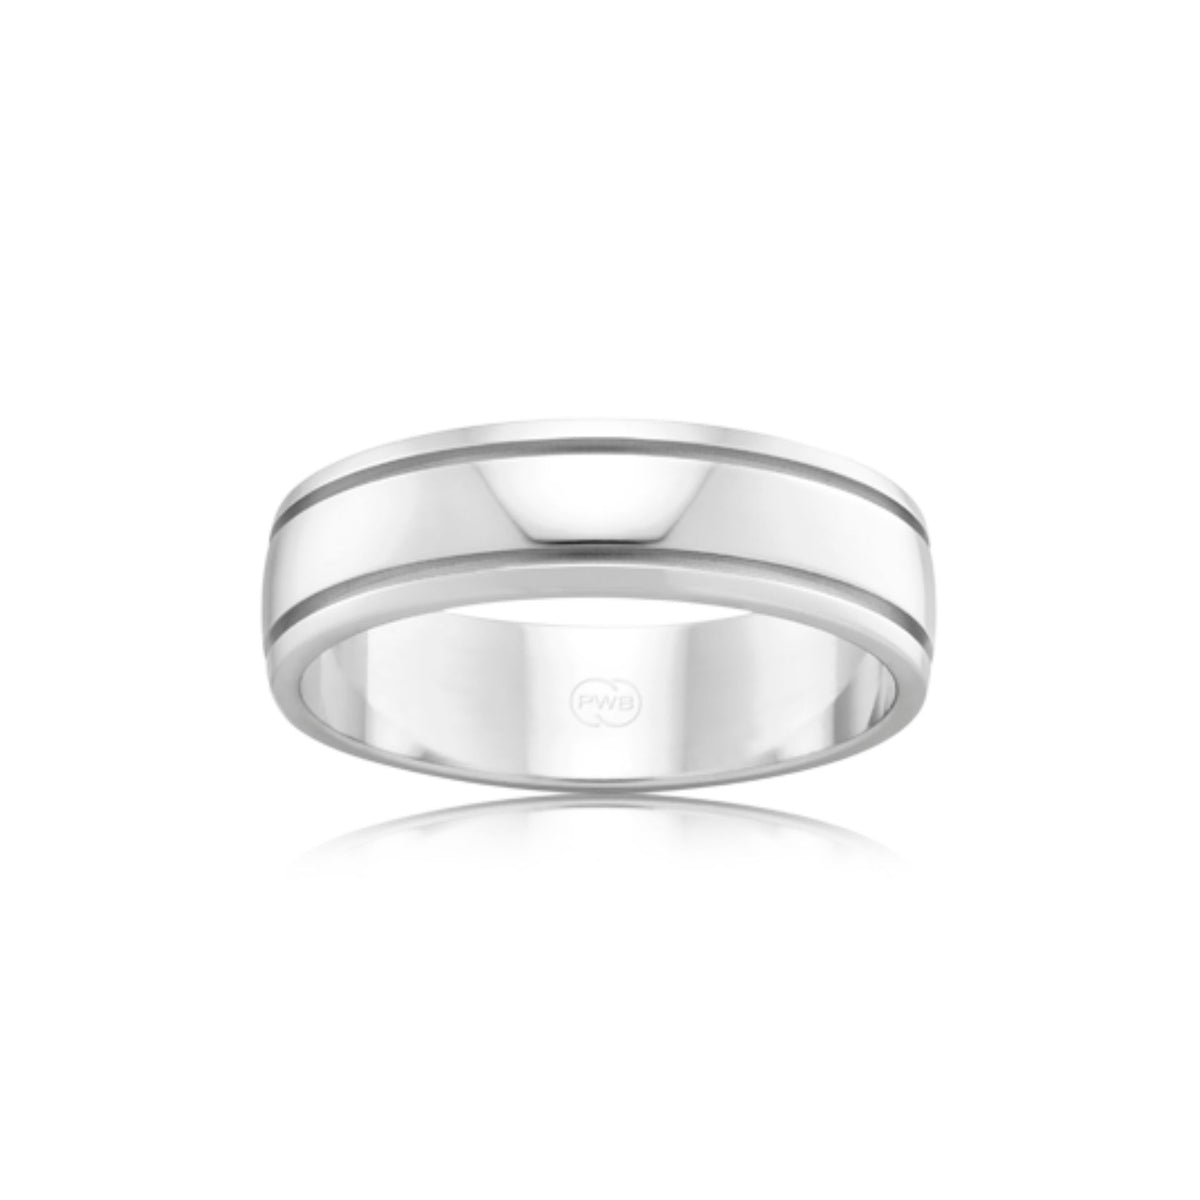 Barrel shaped wedding band with smooth finish &amp; 2 grooves on the edges - Orsini Jewellers